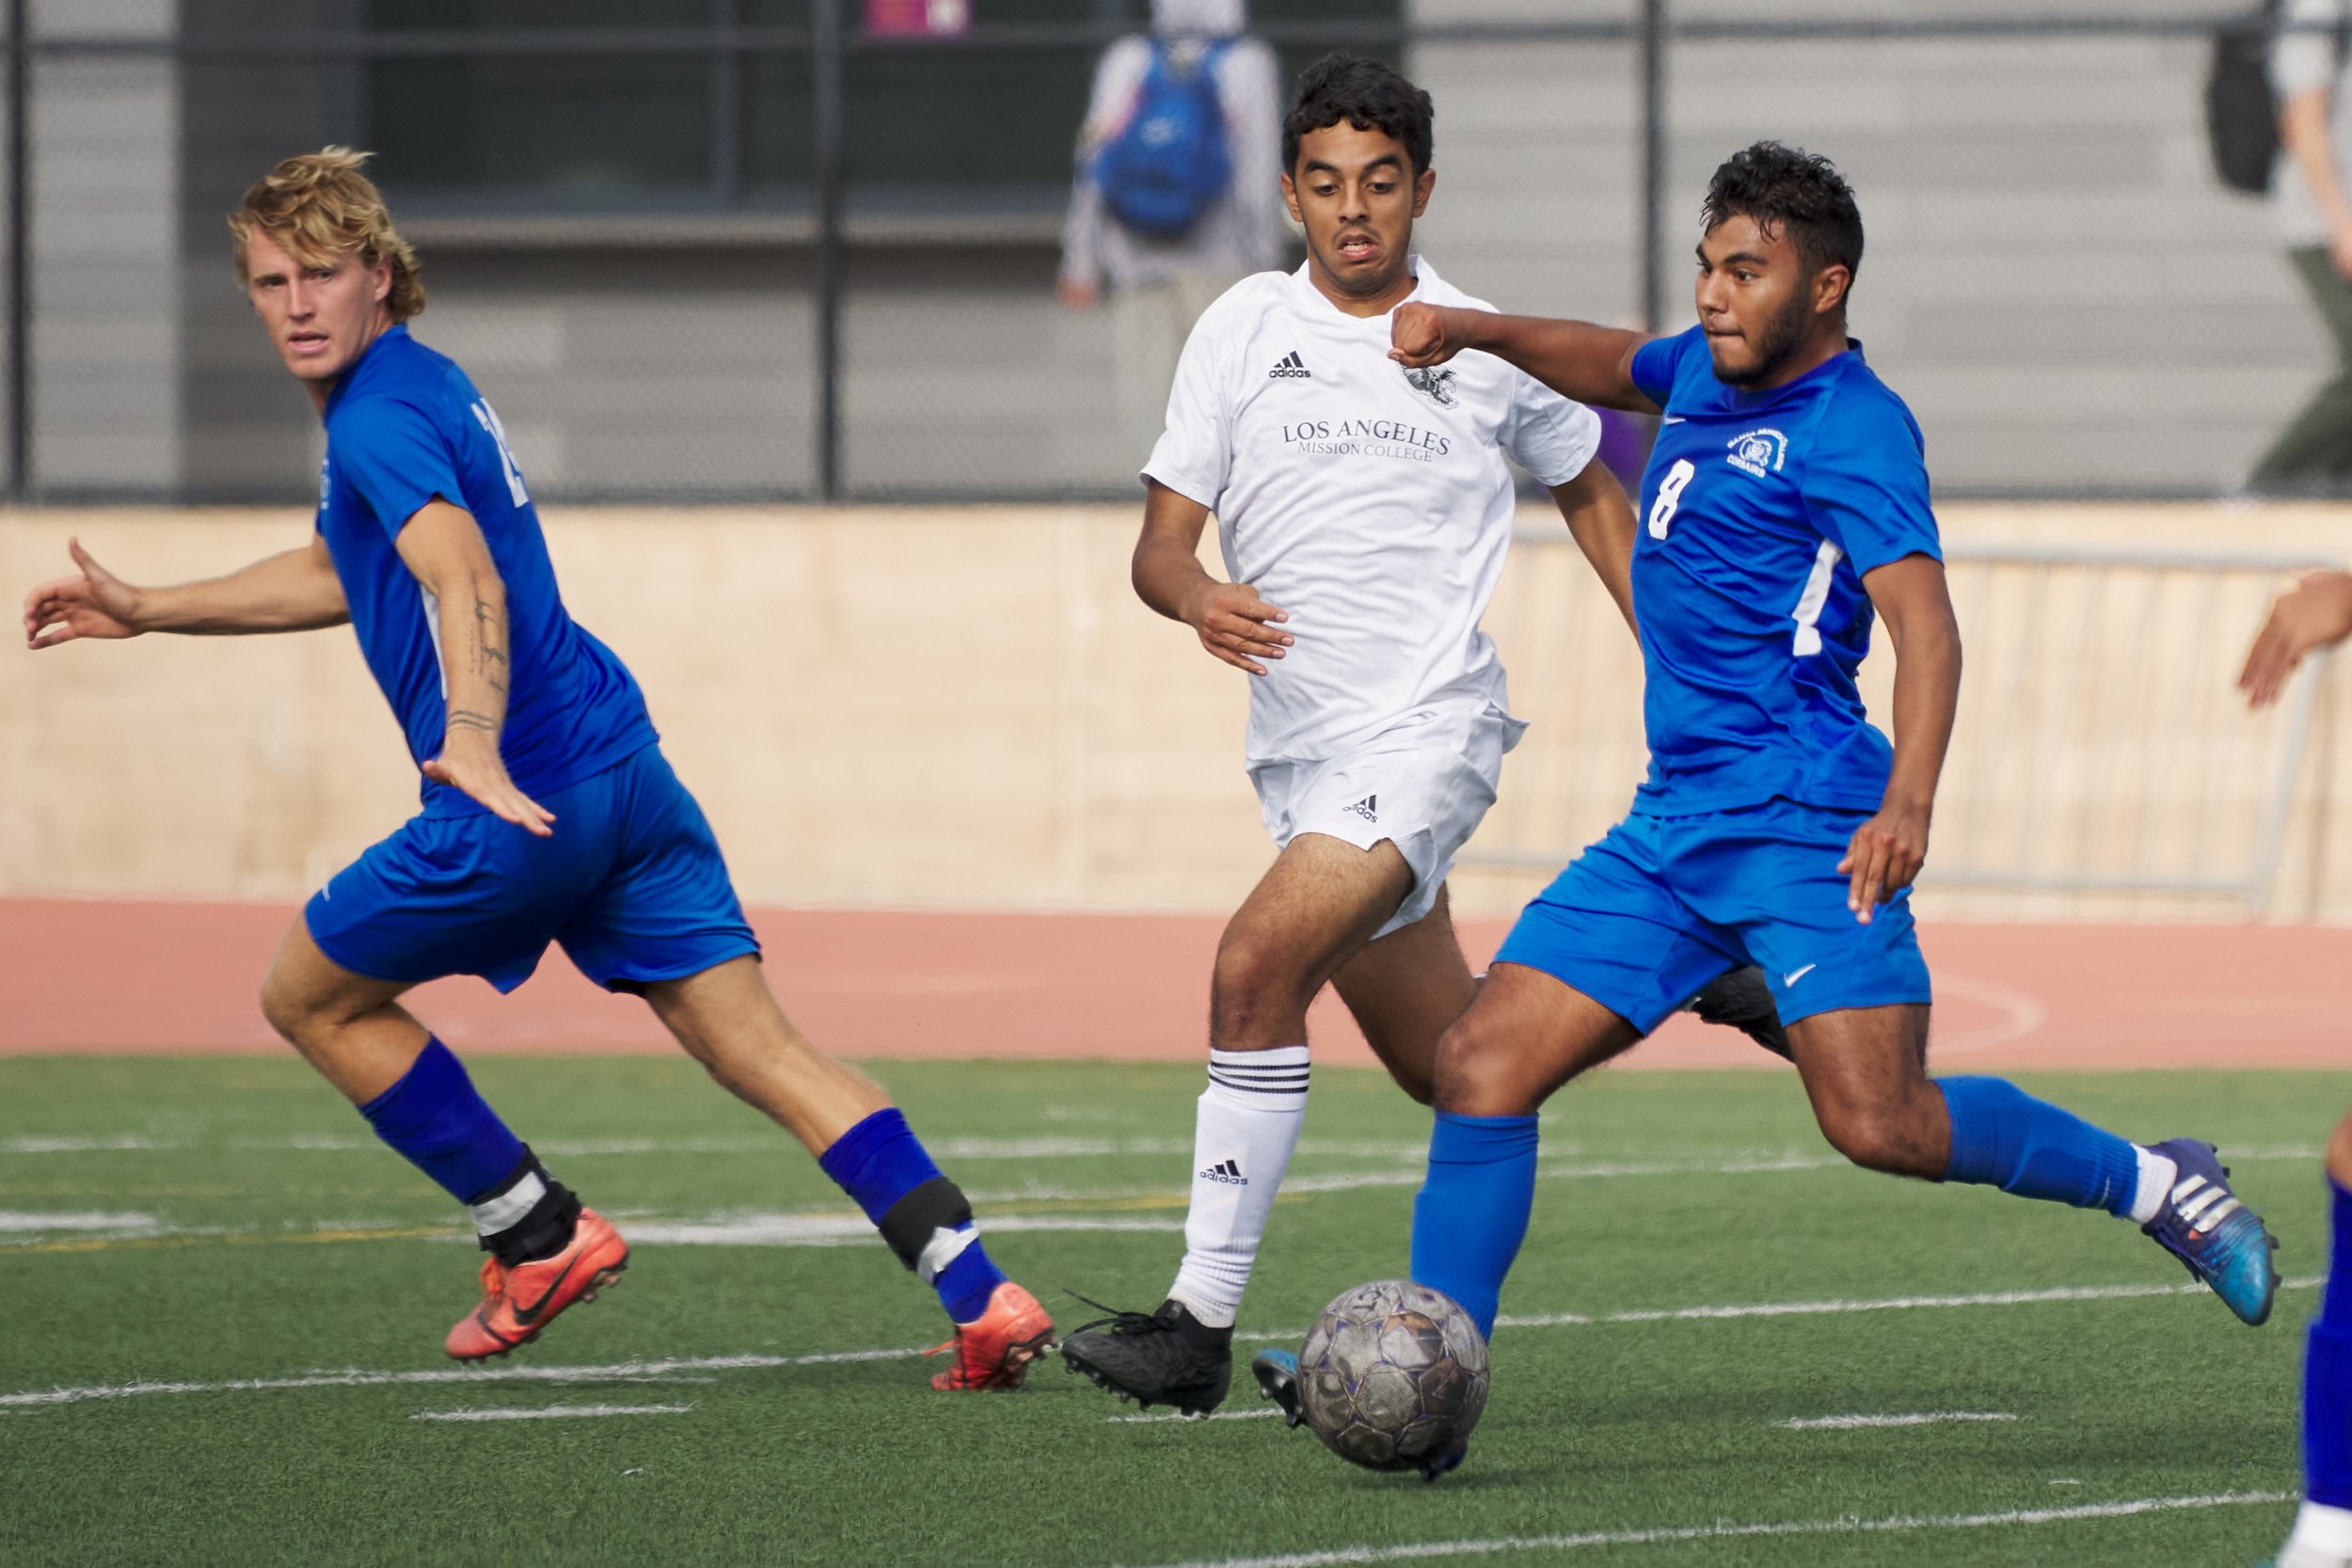  Santa Monica College Corsairs' Alexander Lalor and Jaime Toledo (right), and Los Angeles Mission College Eagles' Nathan Soto during the men's soccer match on Tuesday, Nov. 1, 2022, at Corsair Field in Santa Monica, Calif. The Corsairs won 3-0. (Nich